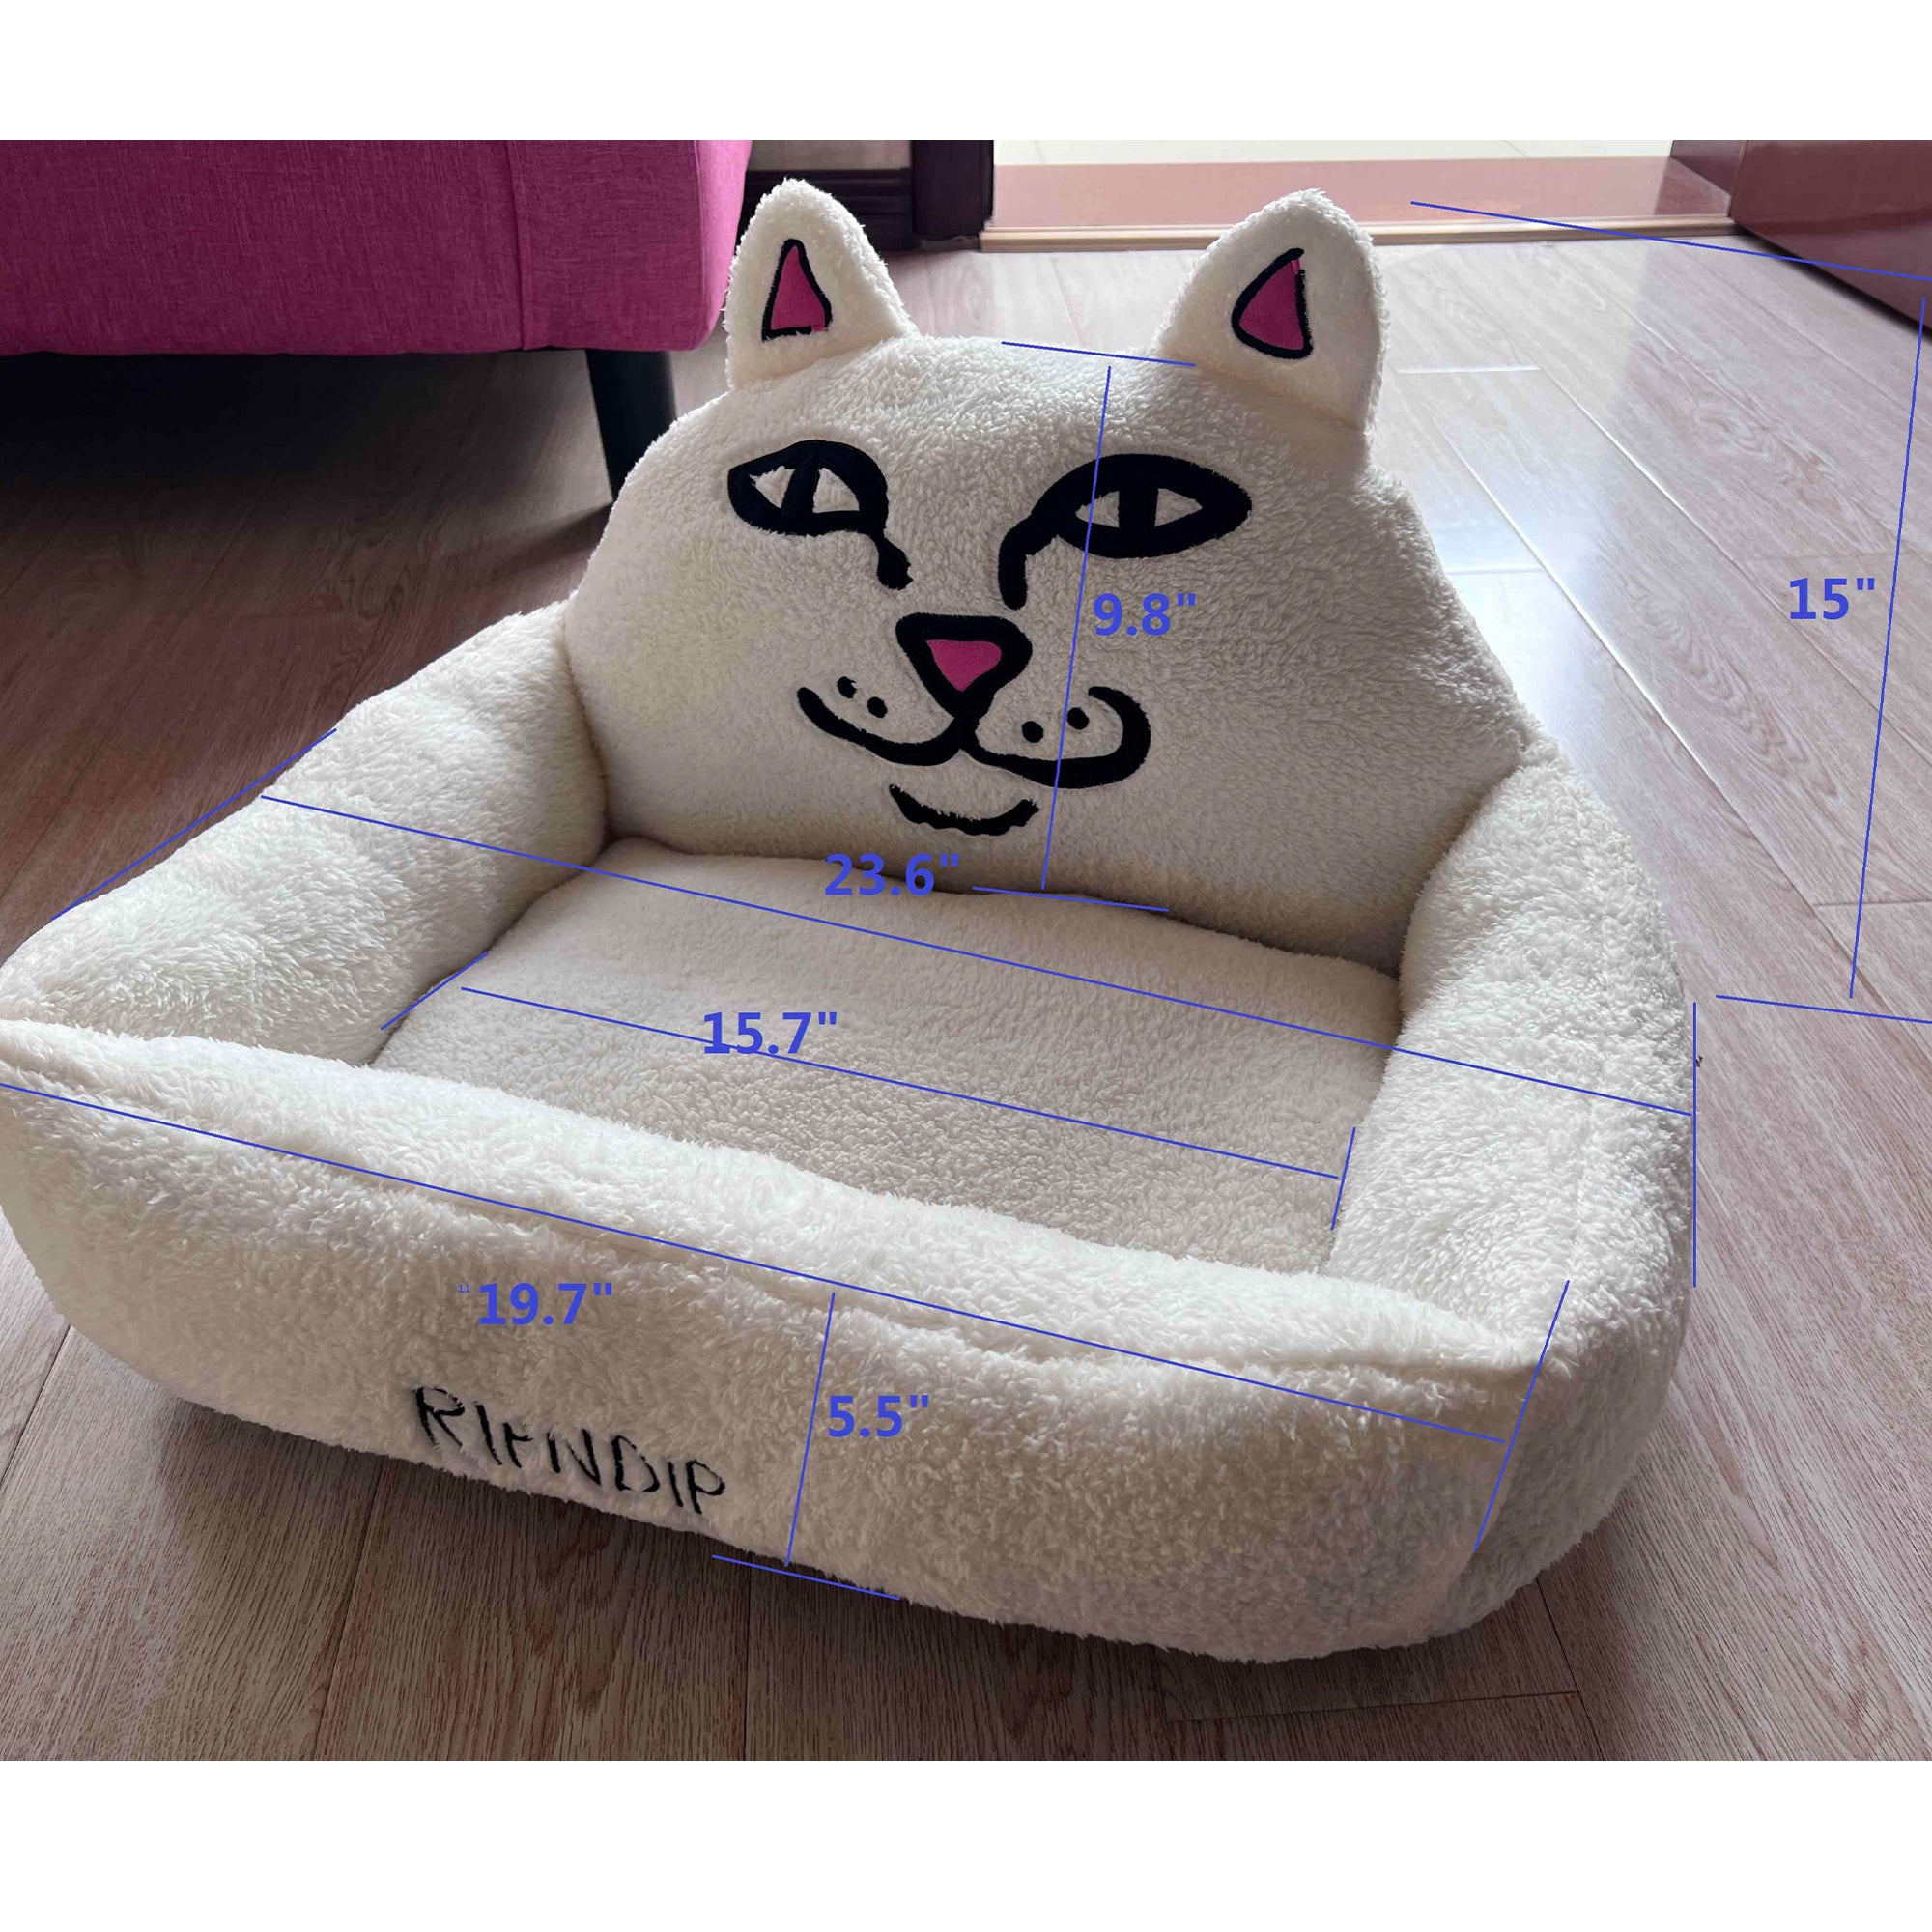 Lord Nermal Small Pet Bed (White)